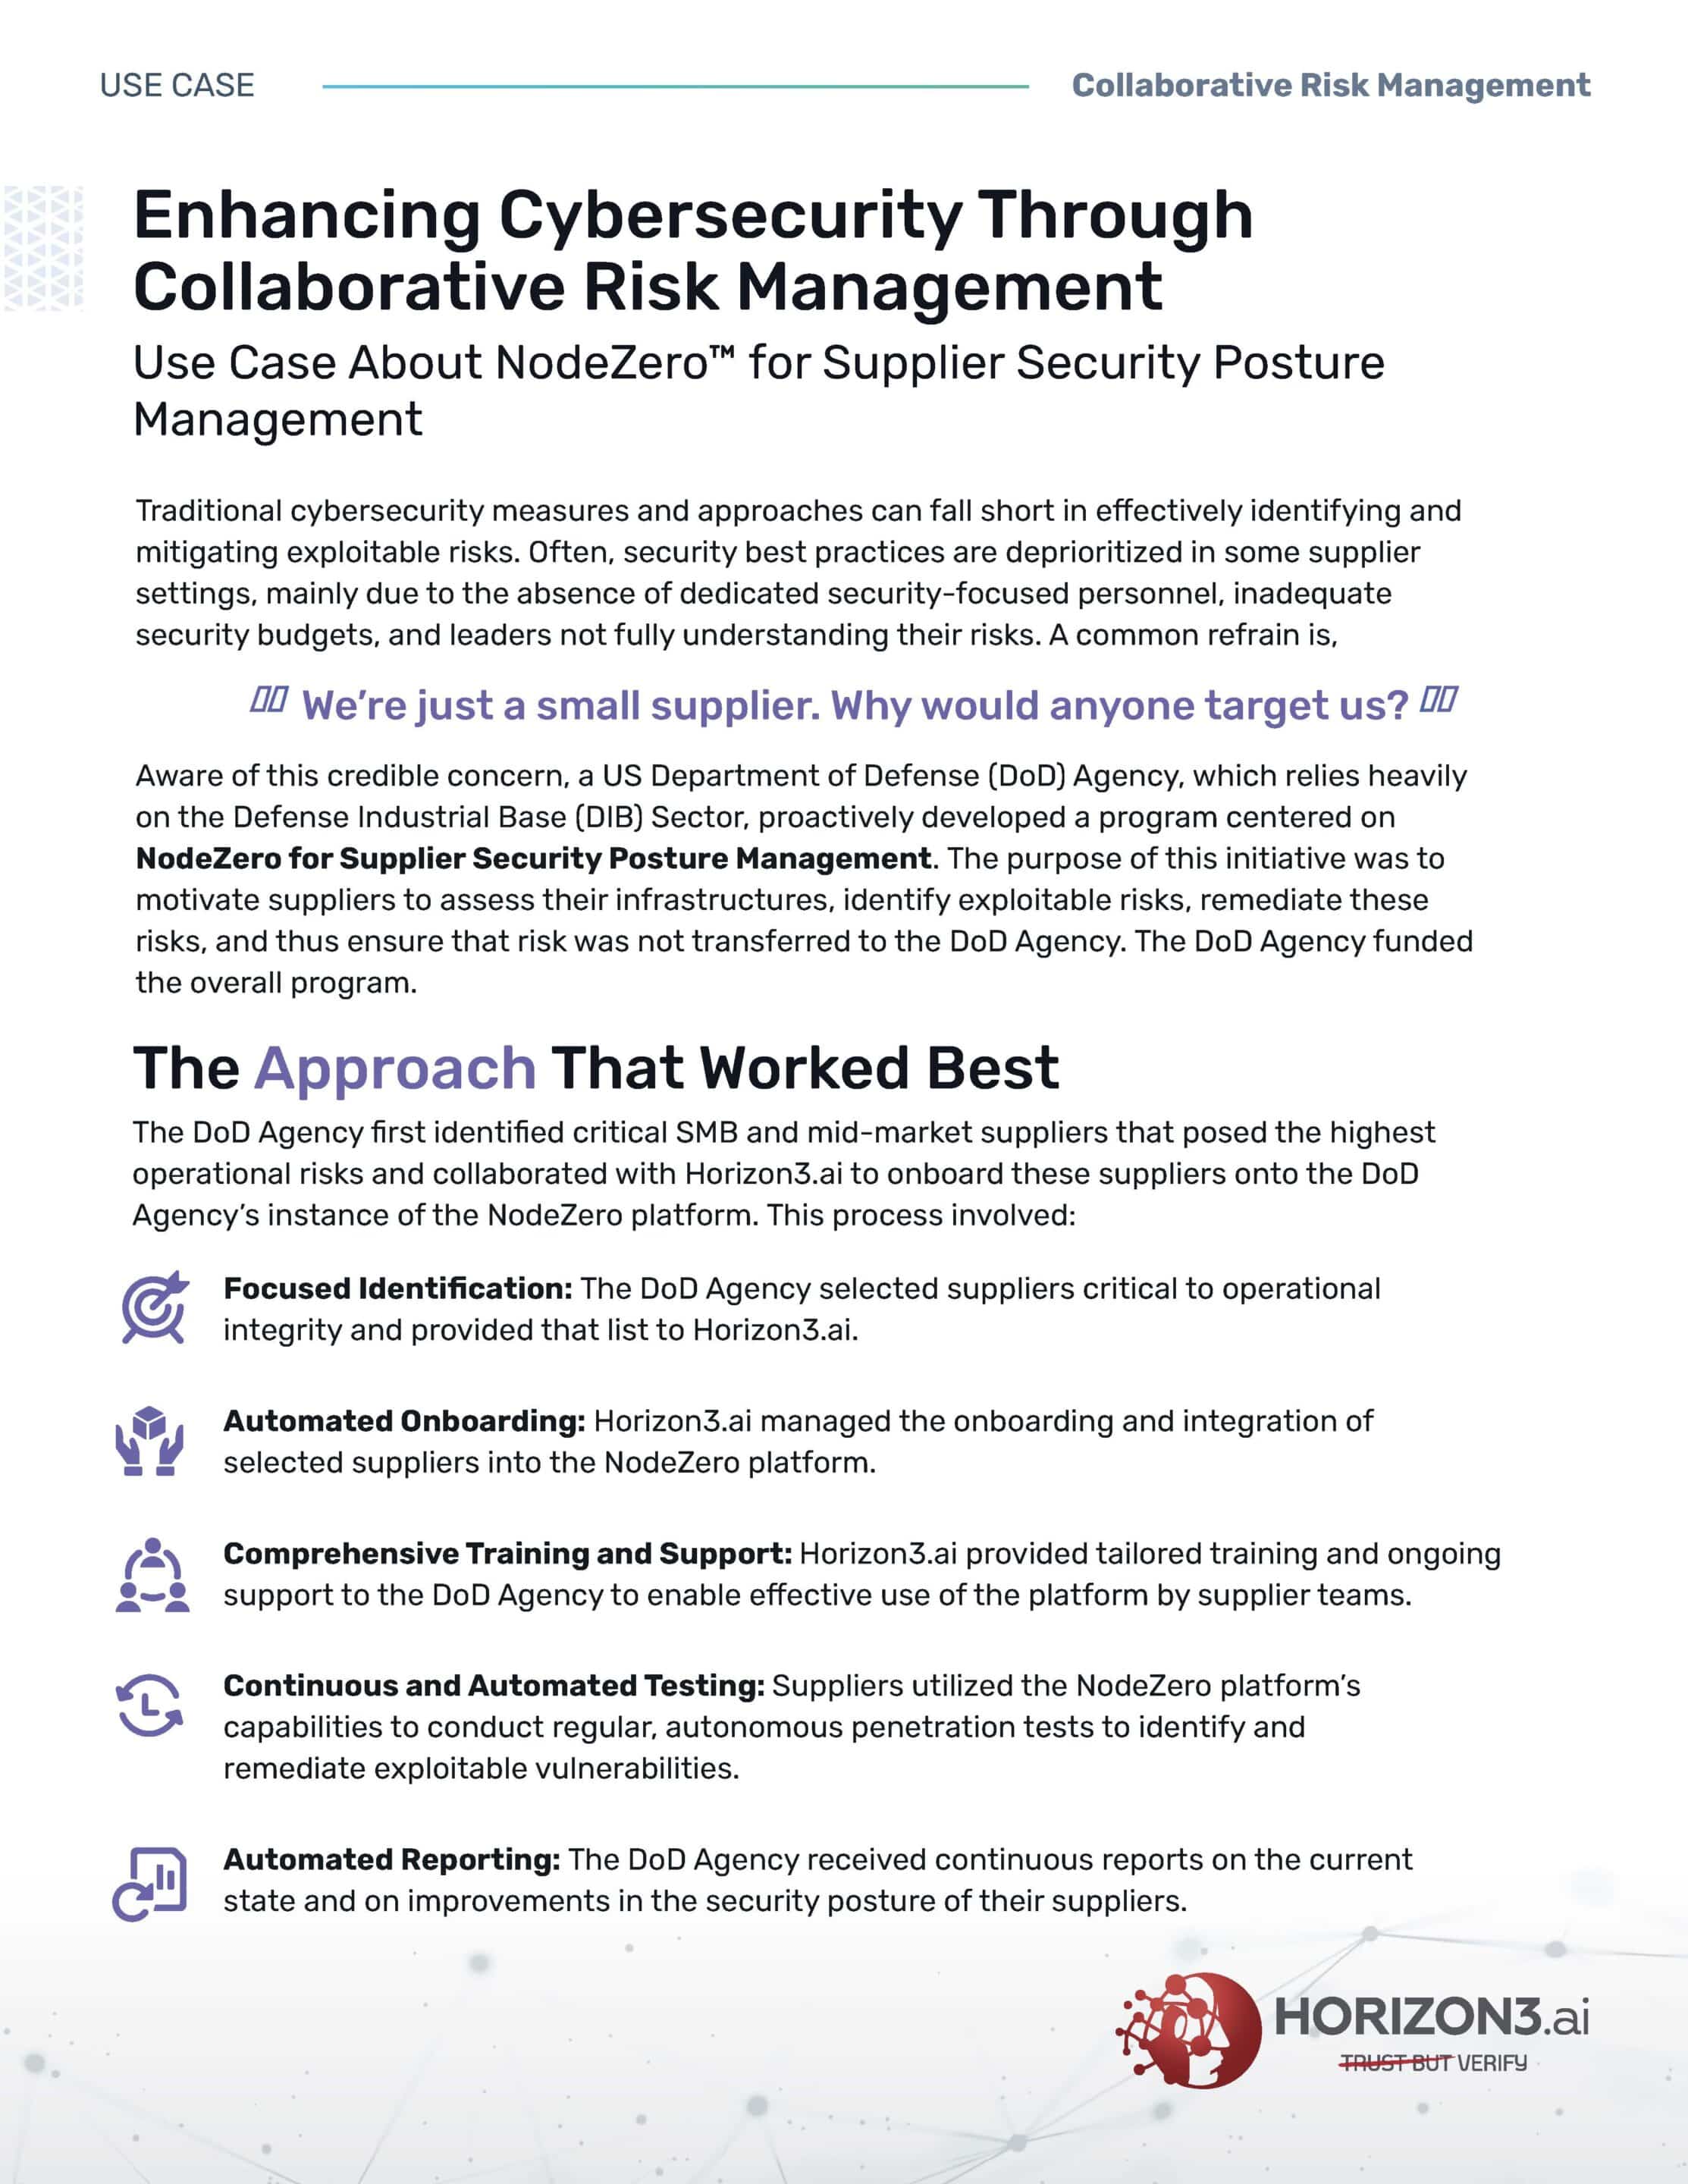 Enhancing Cybersecurity Through Collaborative Risk Management